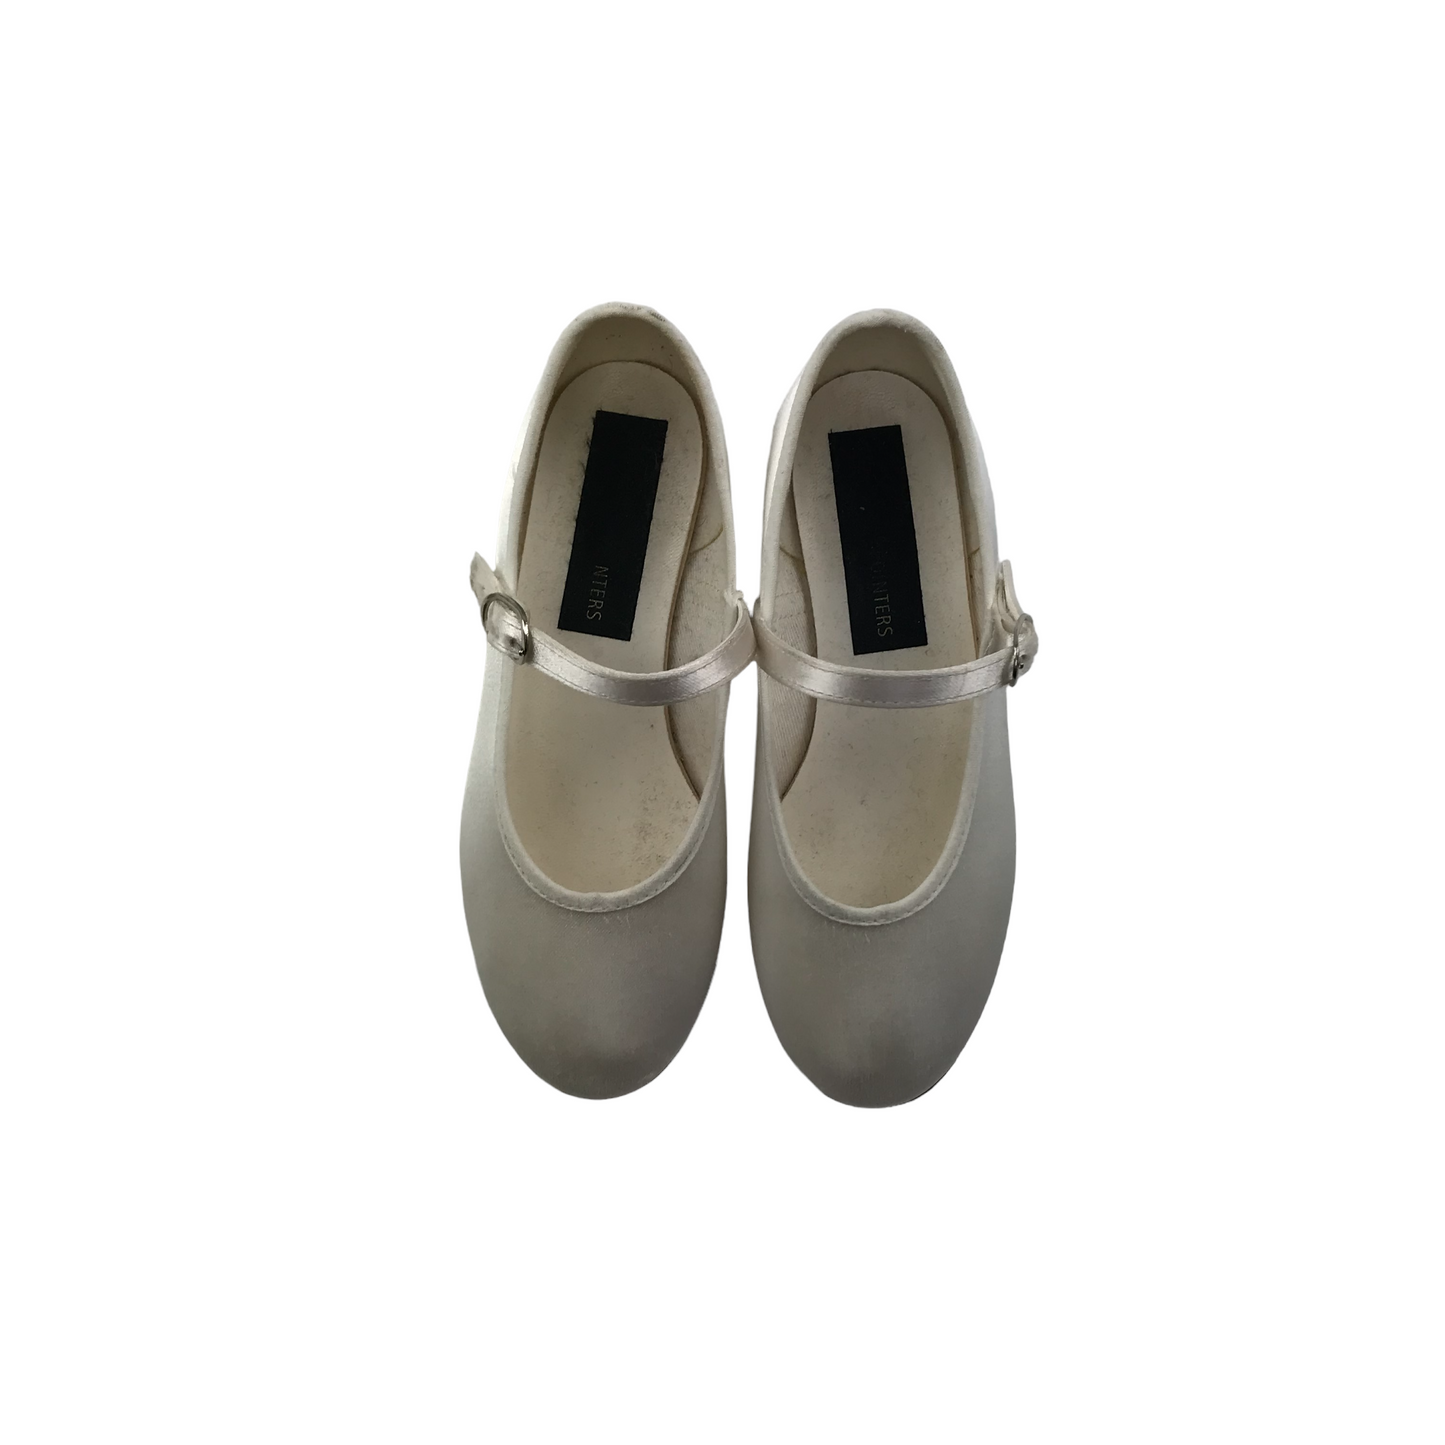 White Ballet Style Pumps with Small Heels Shoe Size 12 junior